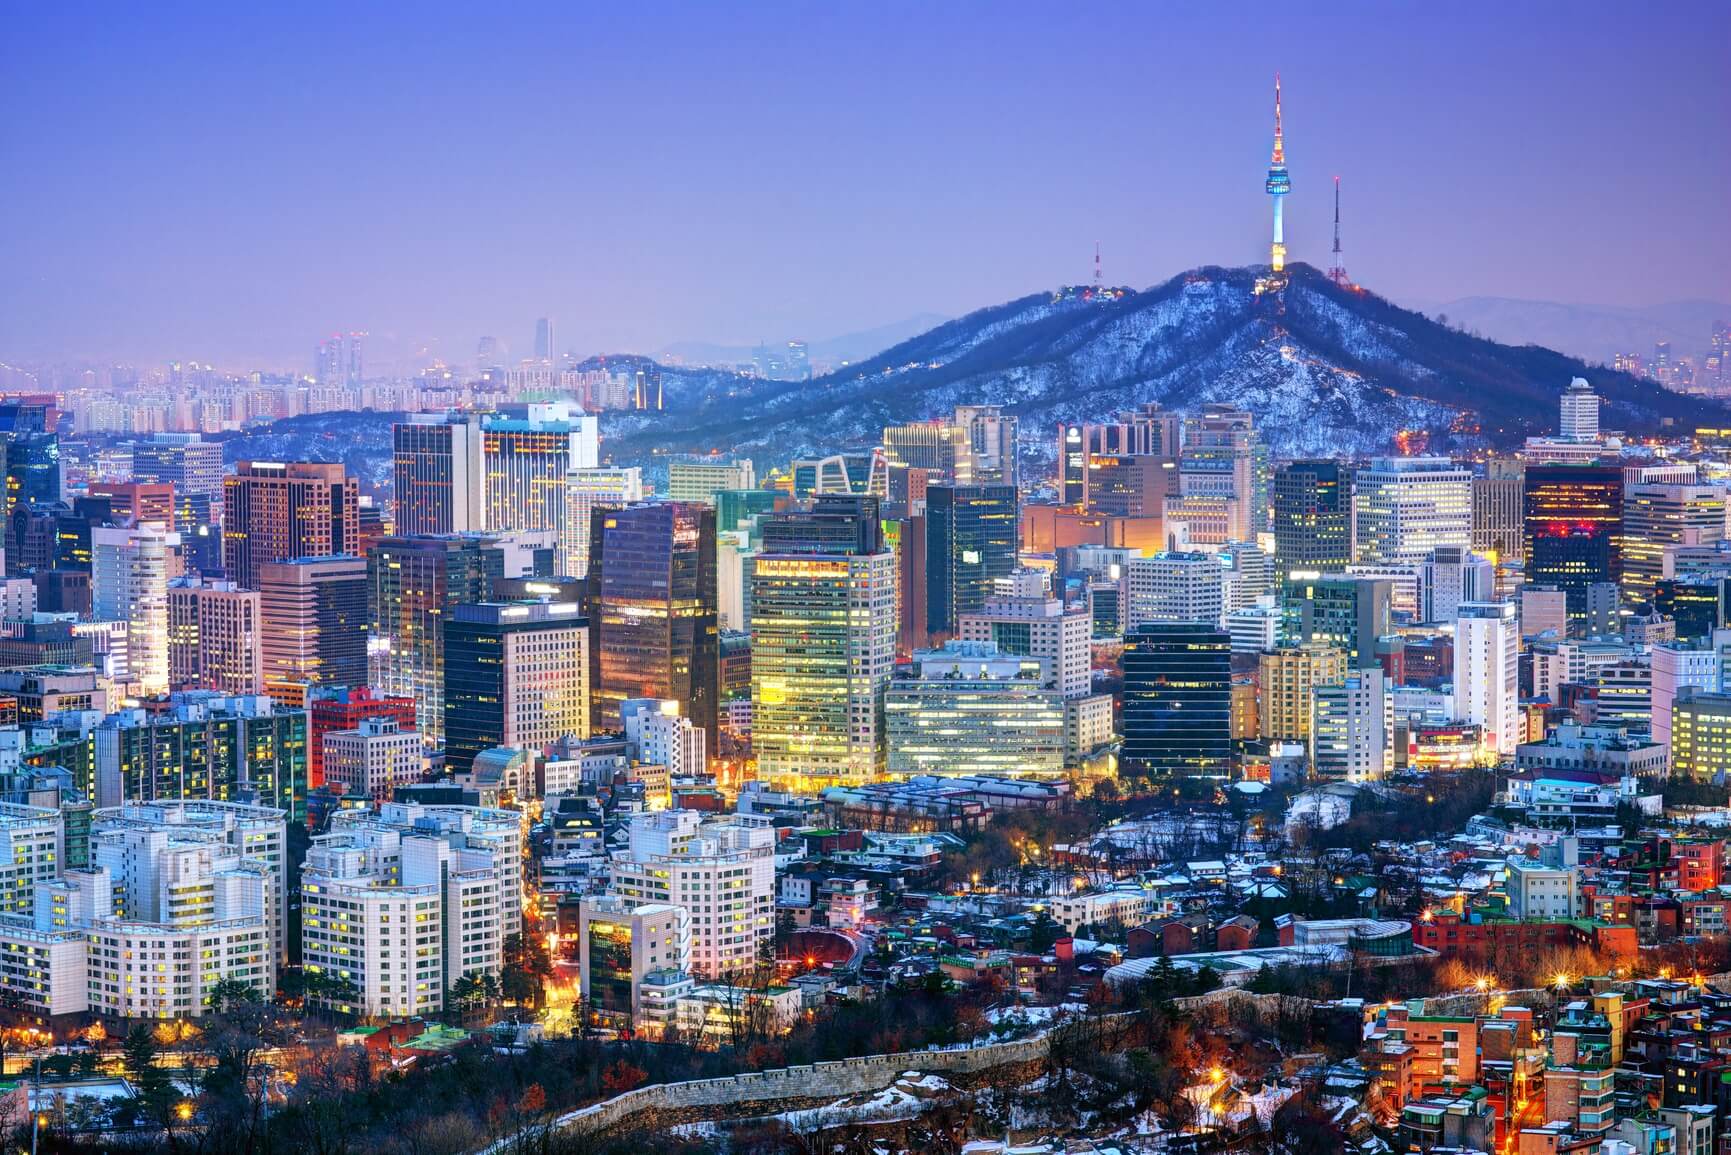 Flight deals from French cities to Seoul, South Korea | Secret Flying